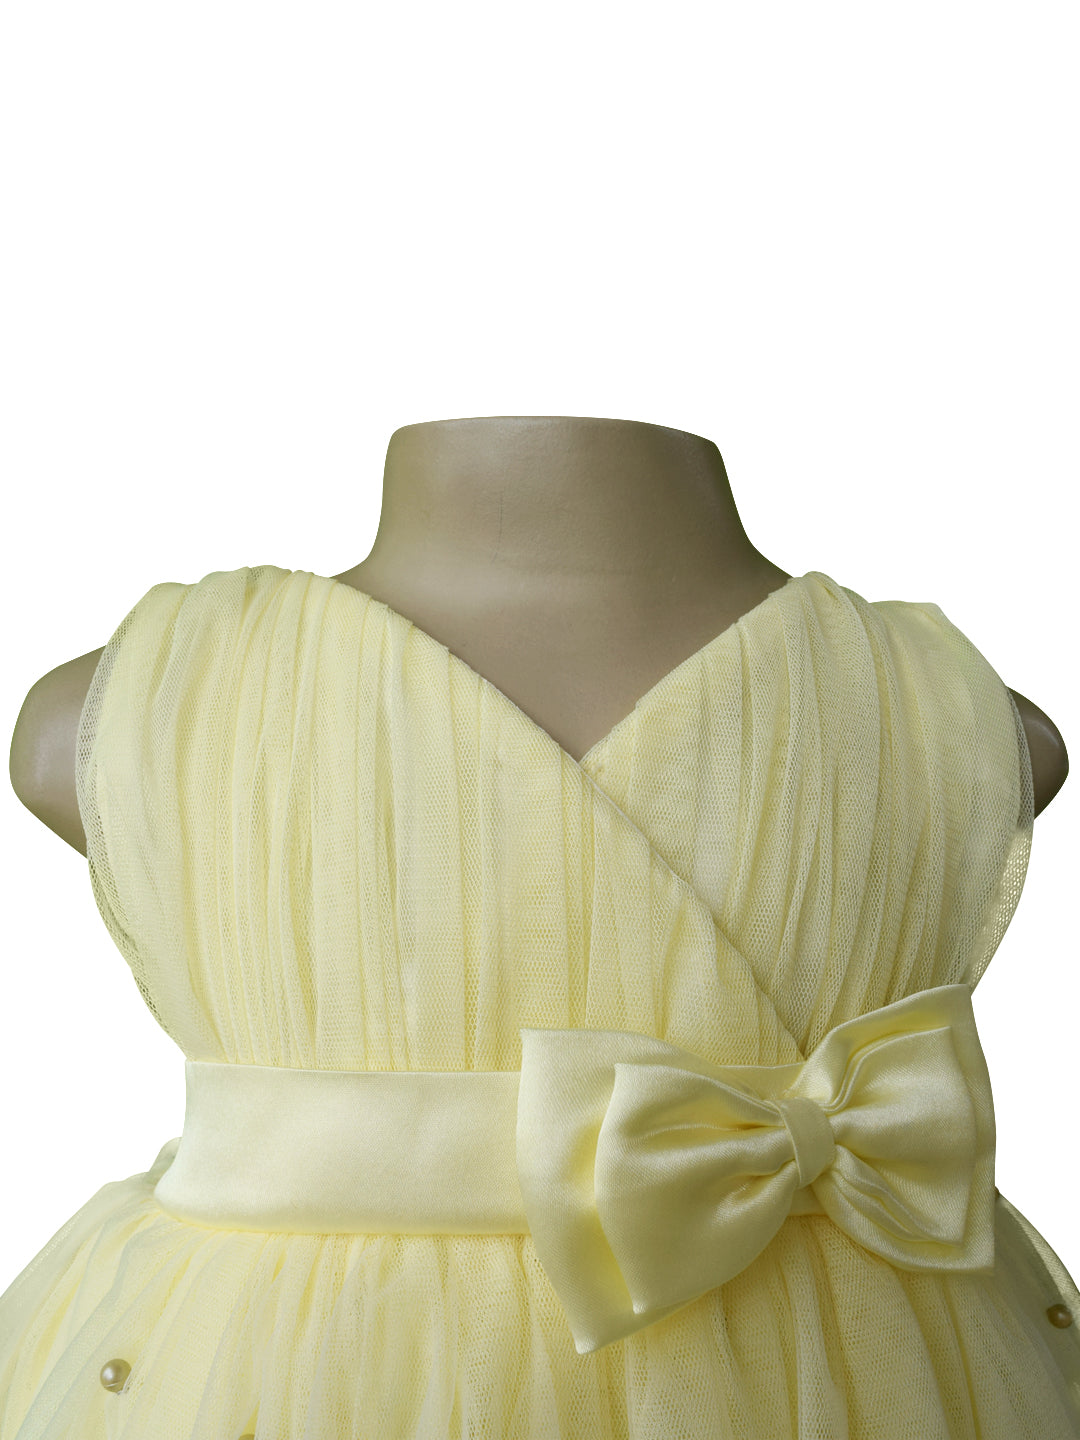 50 New And Unique Baby Frock Designs in 2023 with Images